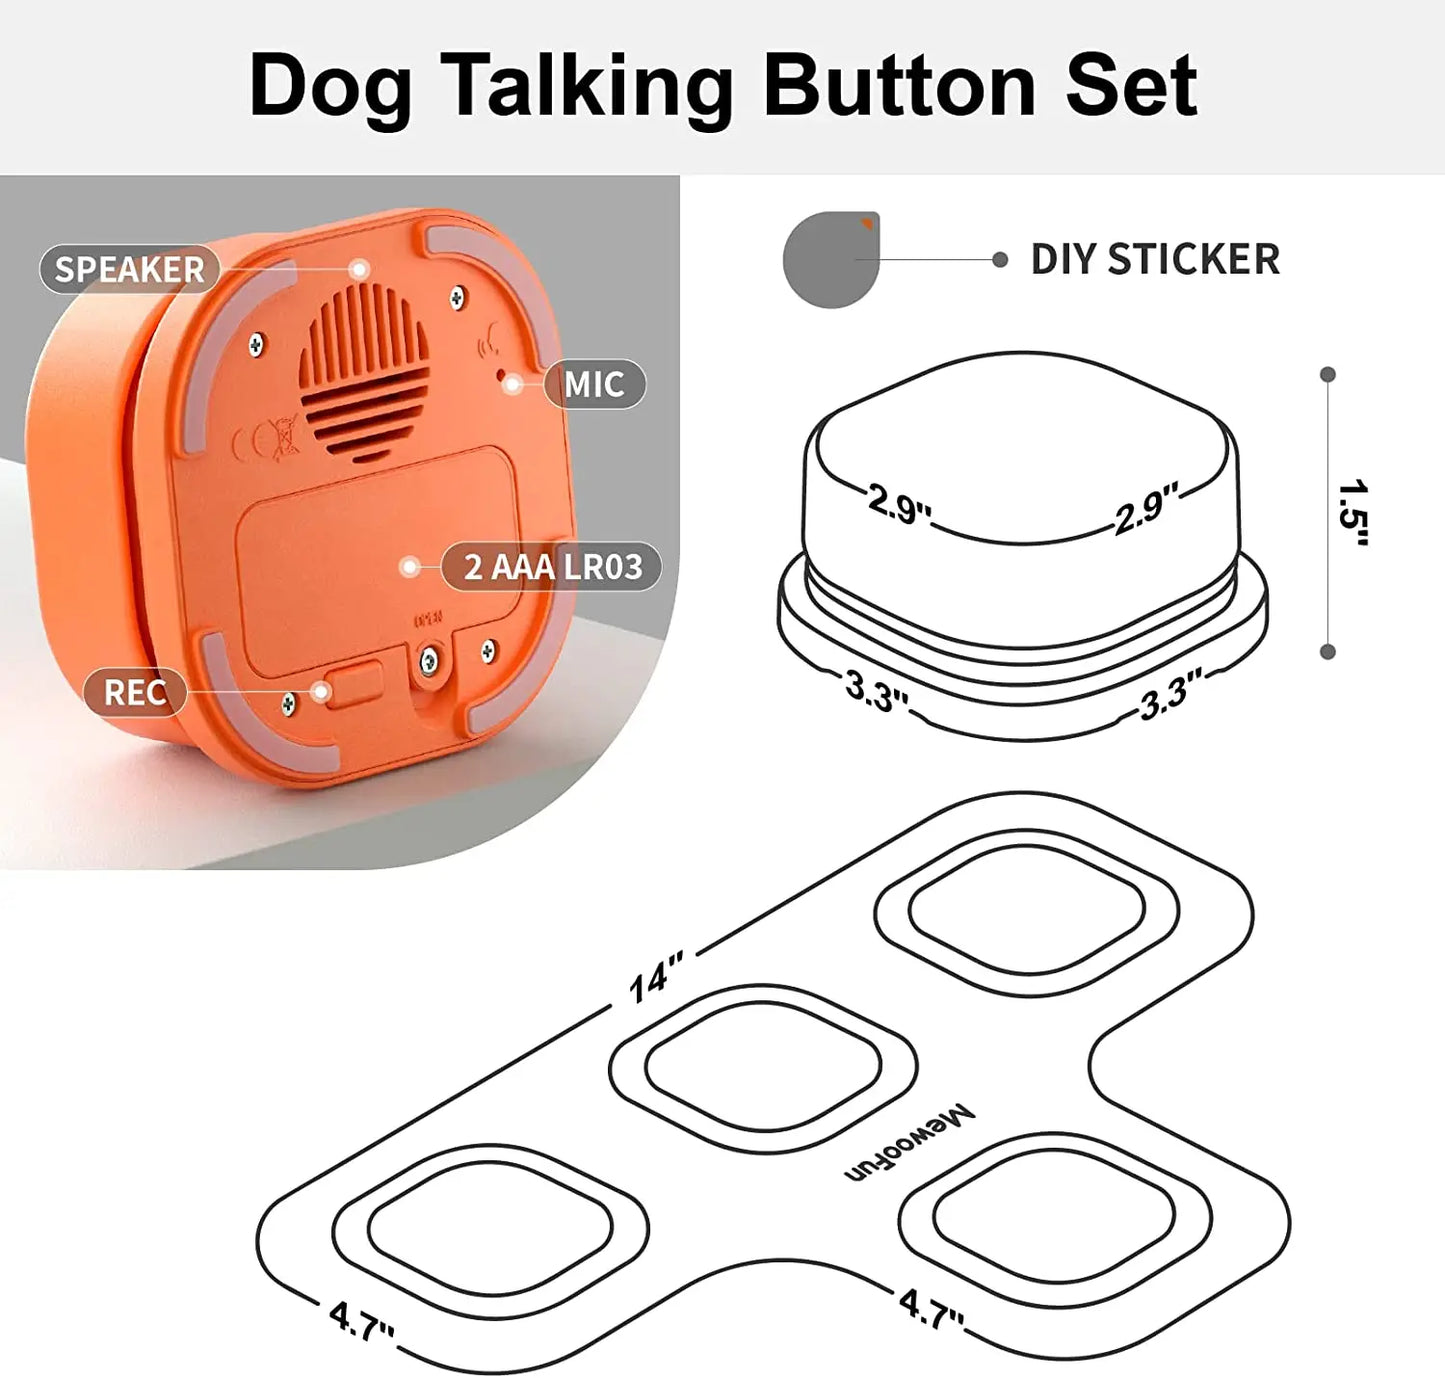 Dog and Cat Button Set with Mat & Stickers Pets Talk Trainable and Recordable Communication Vocalised Voice Toy Clicker